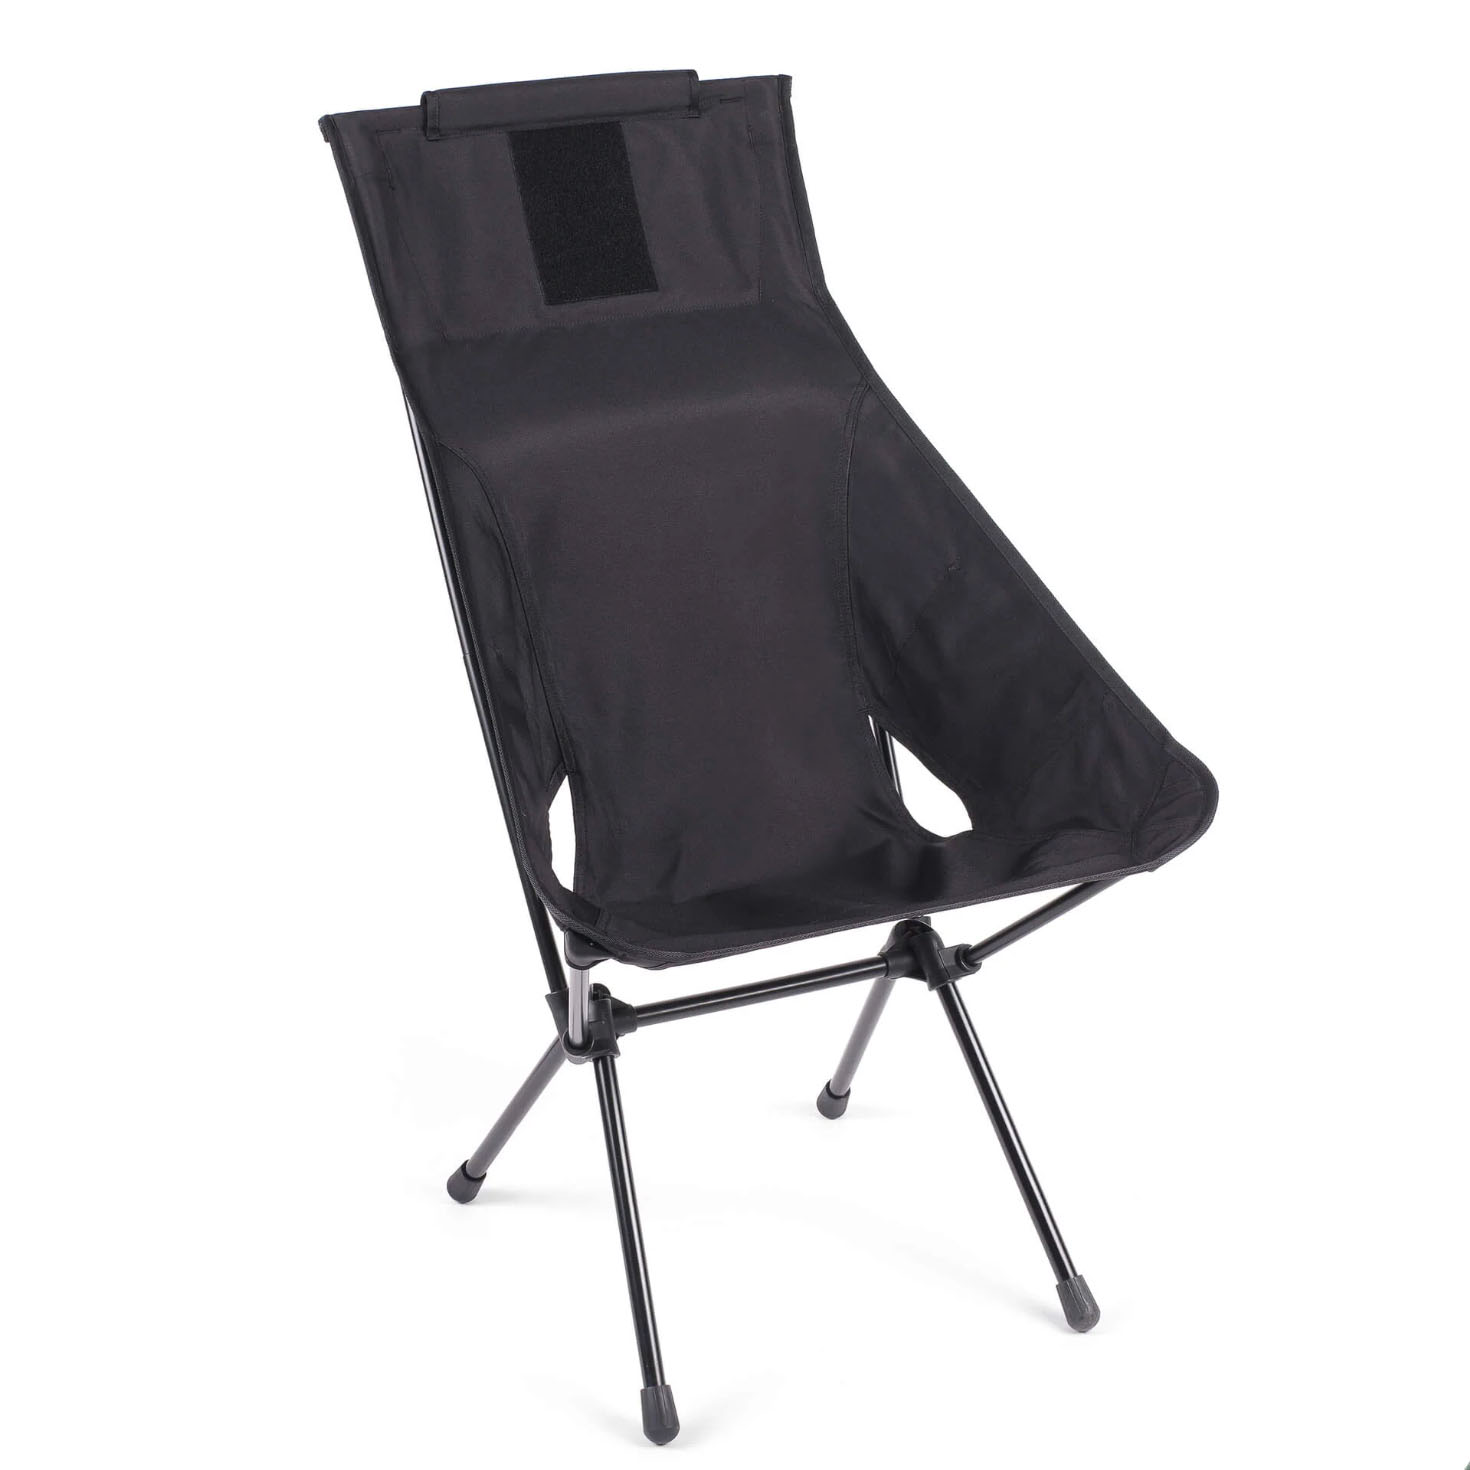 Tactical Sunset Chair in black